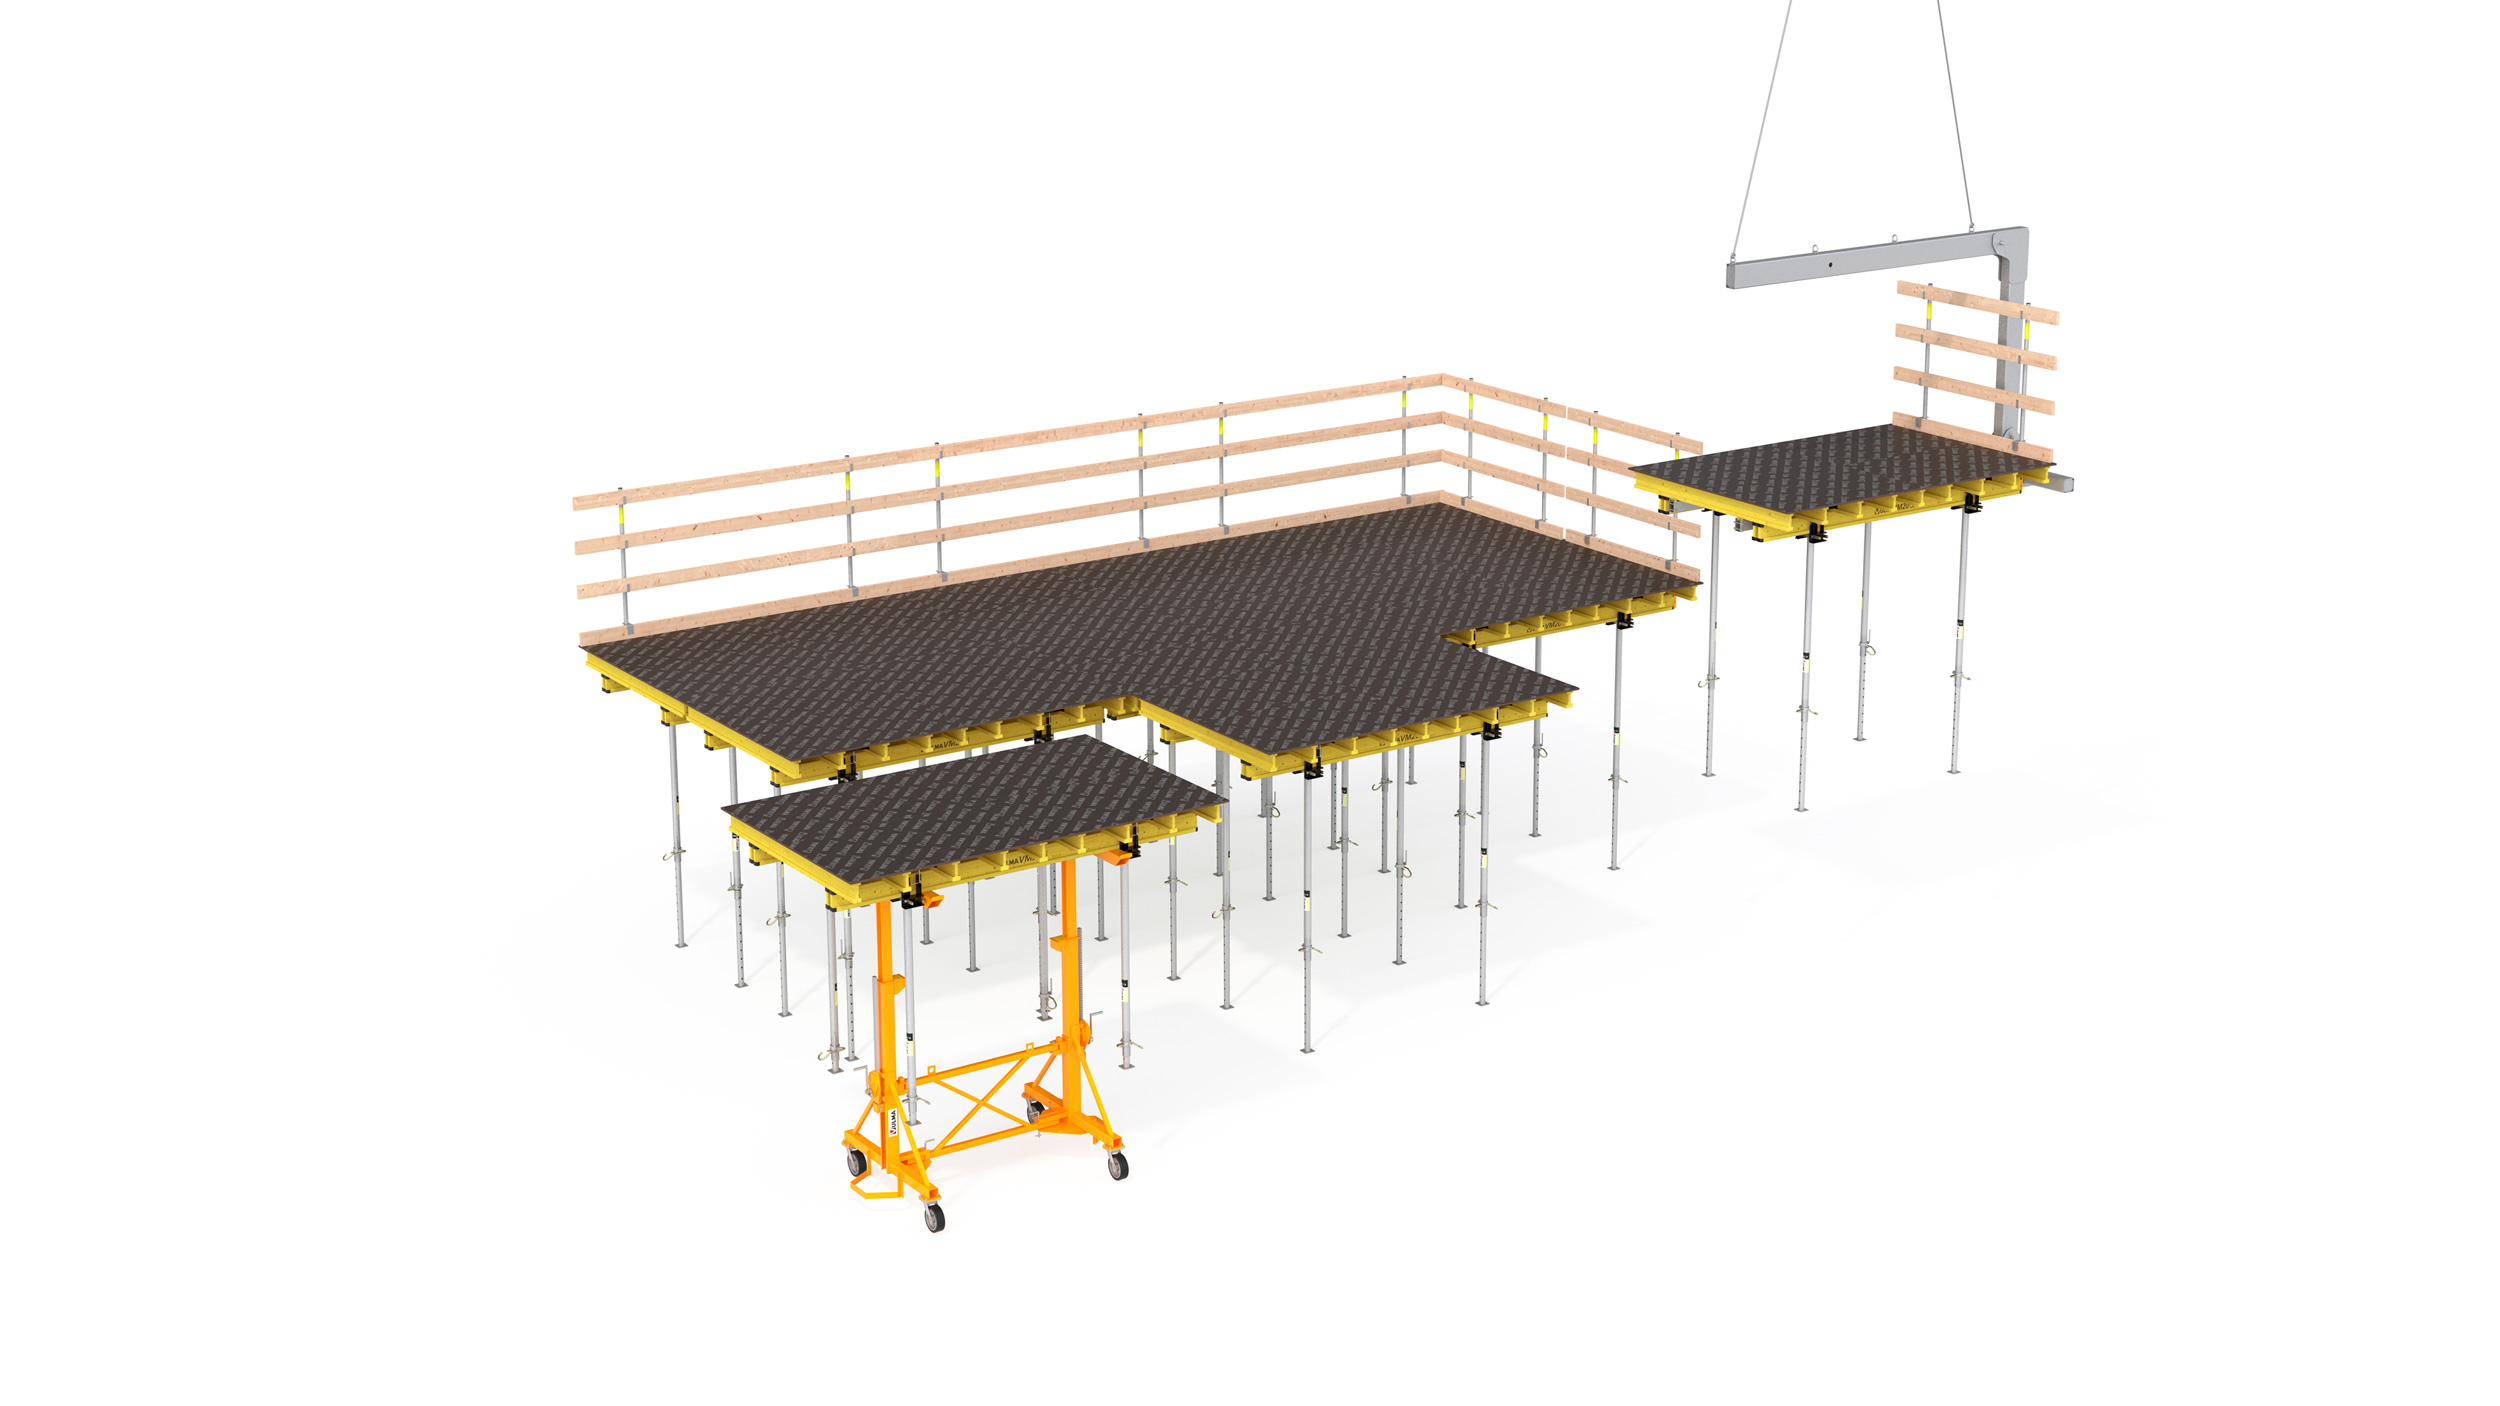 Hugely effective table form for regular geometry large floor slabs. Perfect for building construction. 
Highlights: Speeds up working pace, provides safety and excellent concrete finishes.